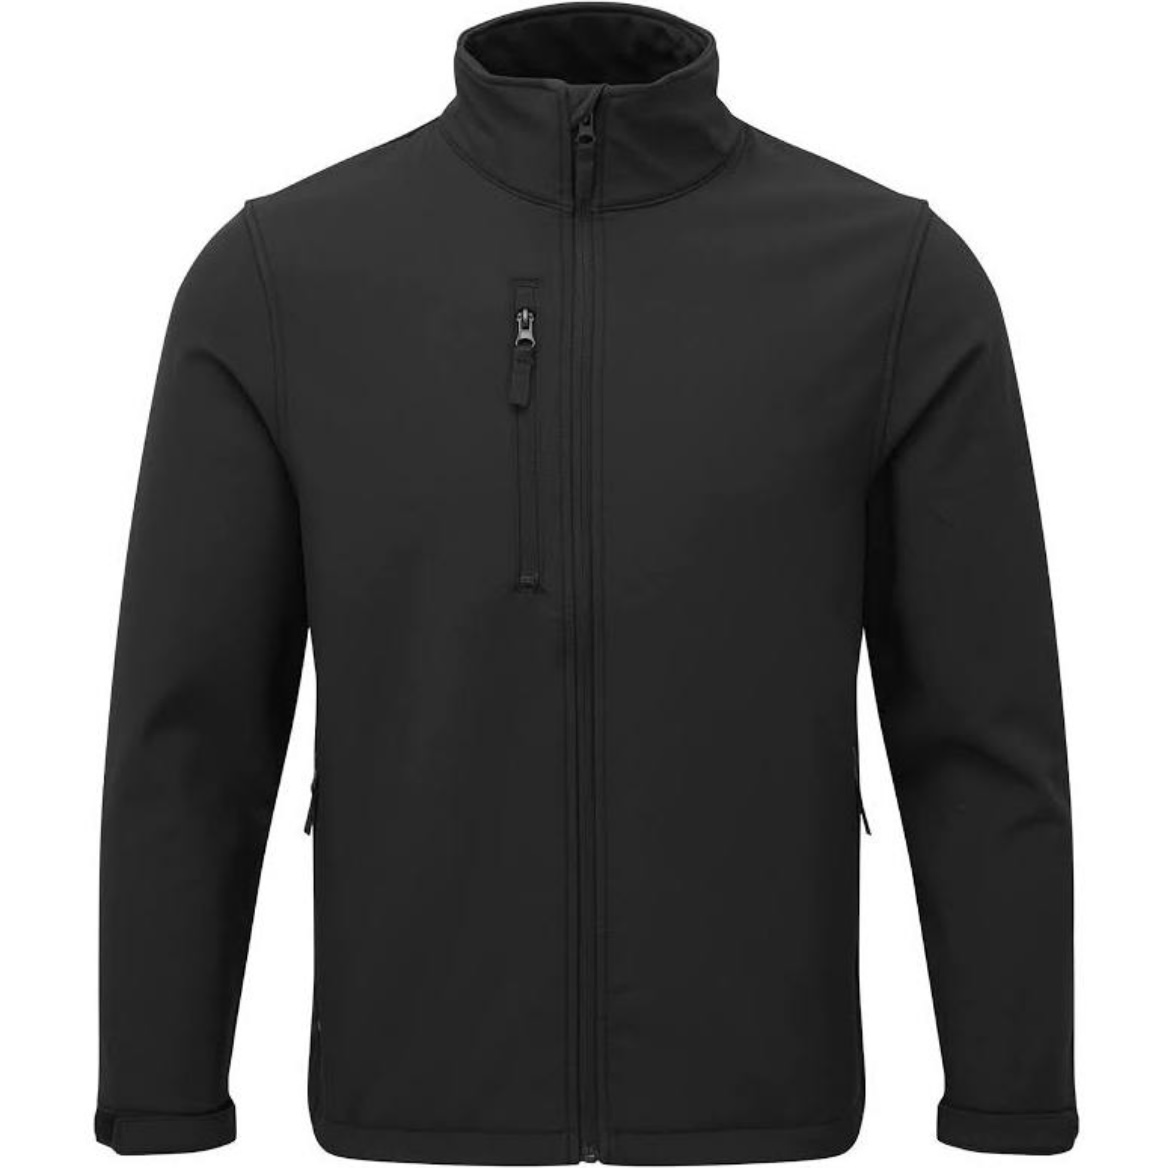 FORTRESS SELKIRK SOFTSHELL JACKET - BLACK - Murray Excel